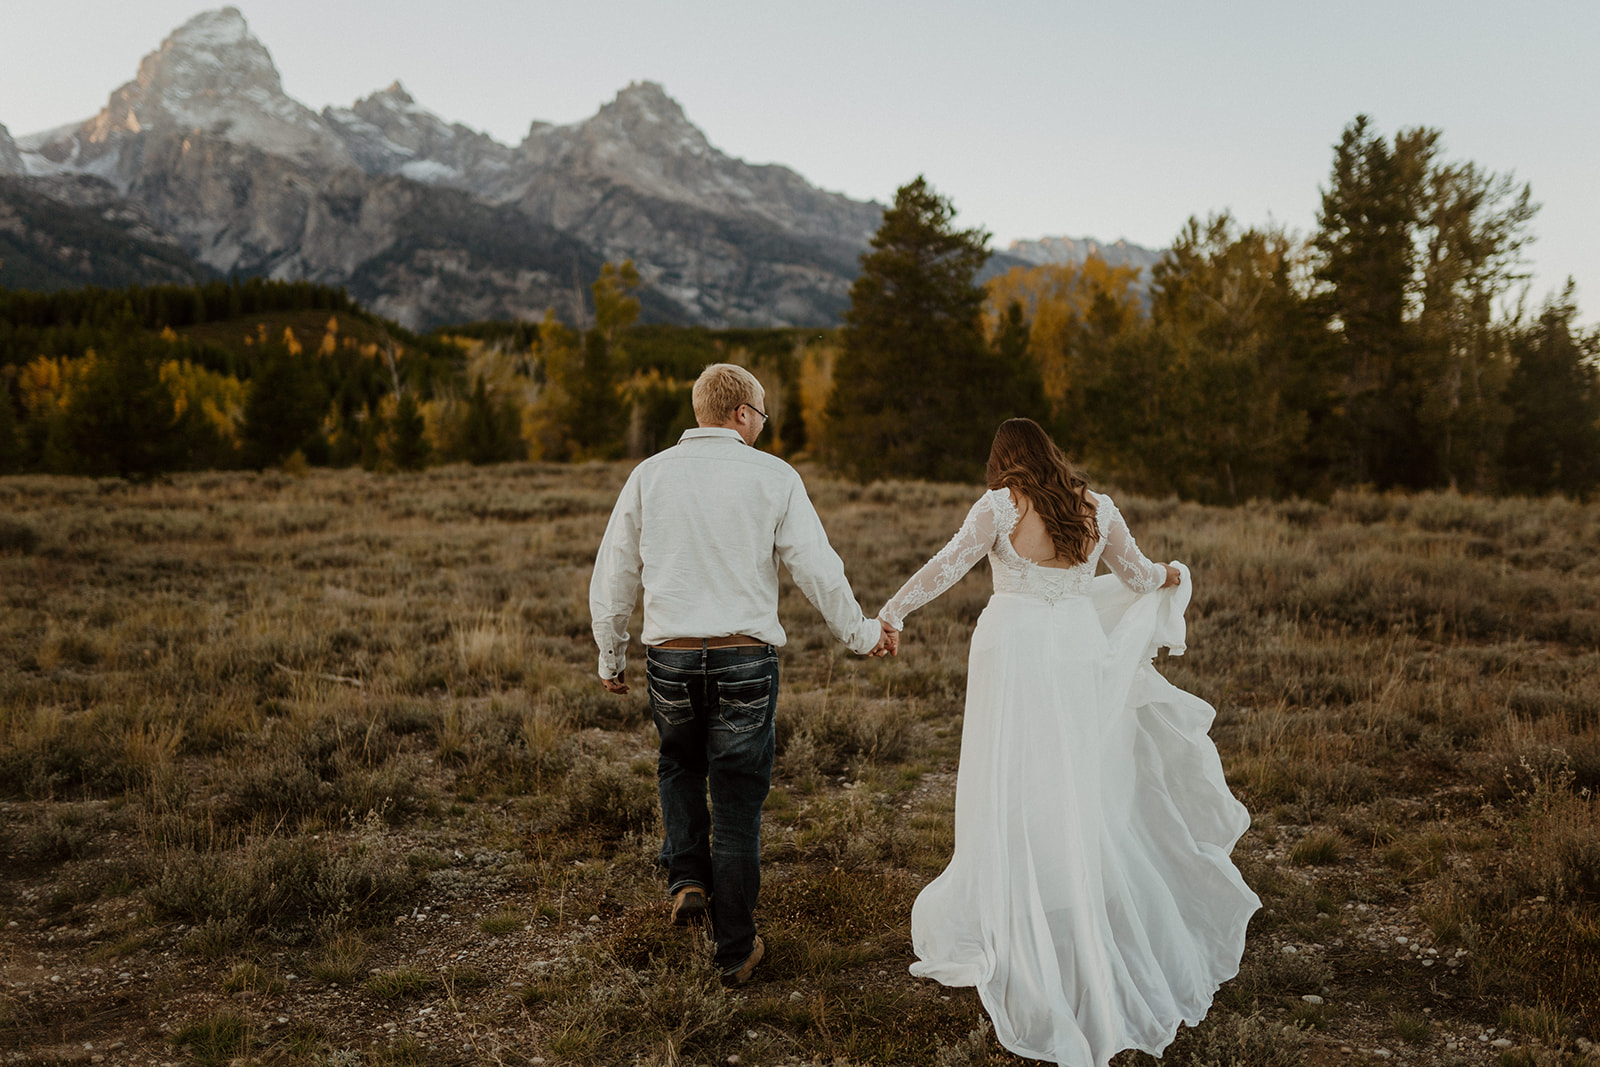 A couple running hand-in-hand through an open field after having their wedding in Grand Teton National Park.